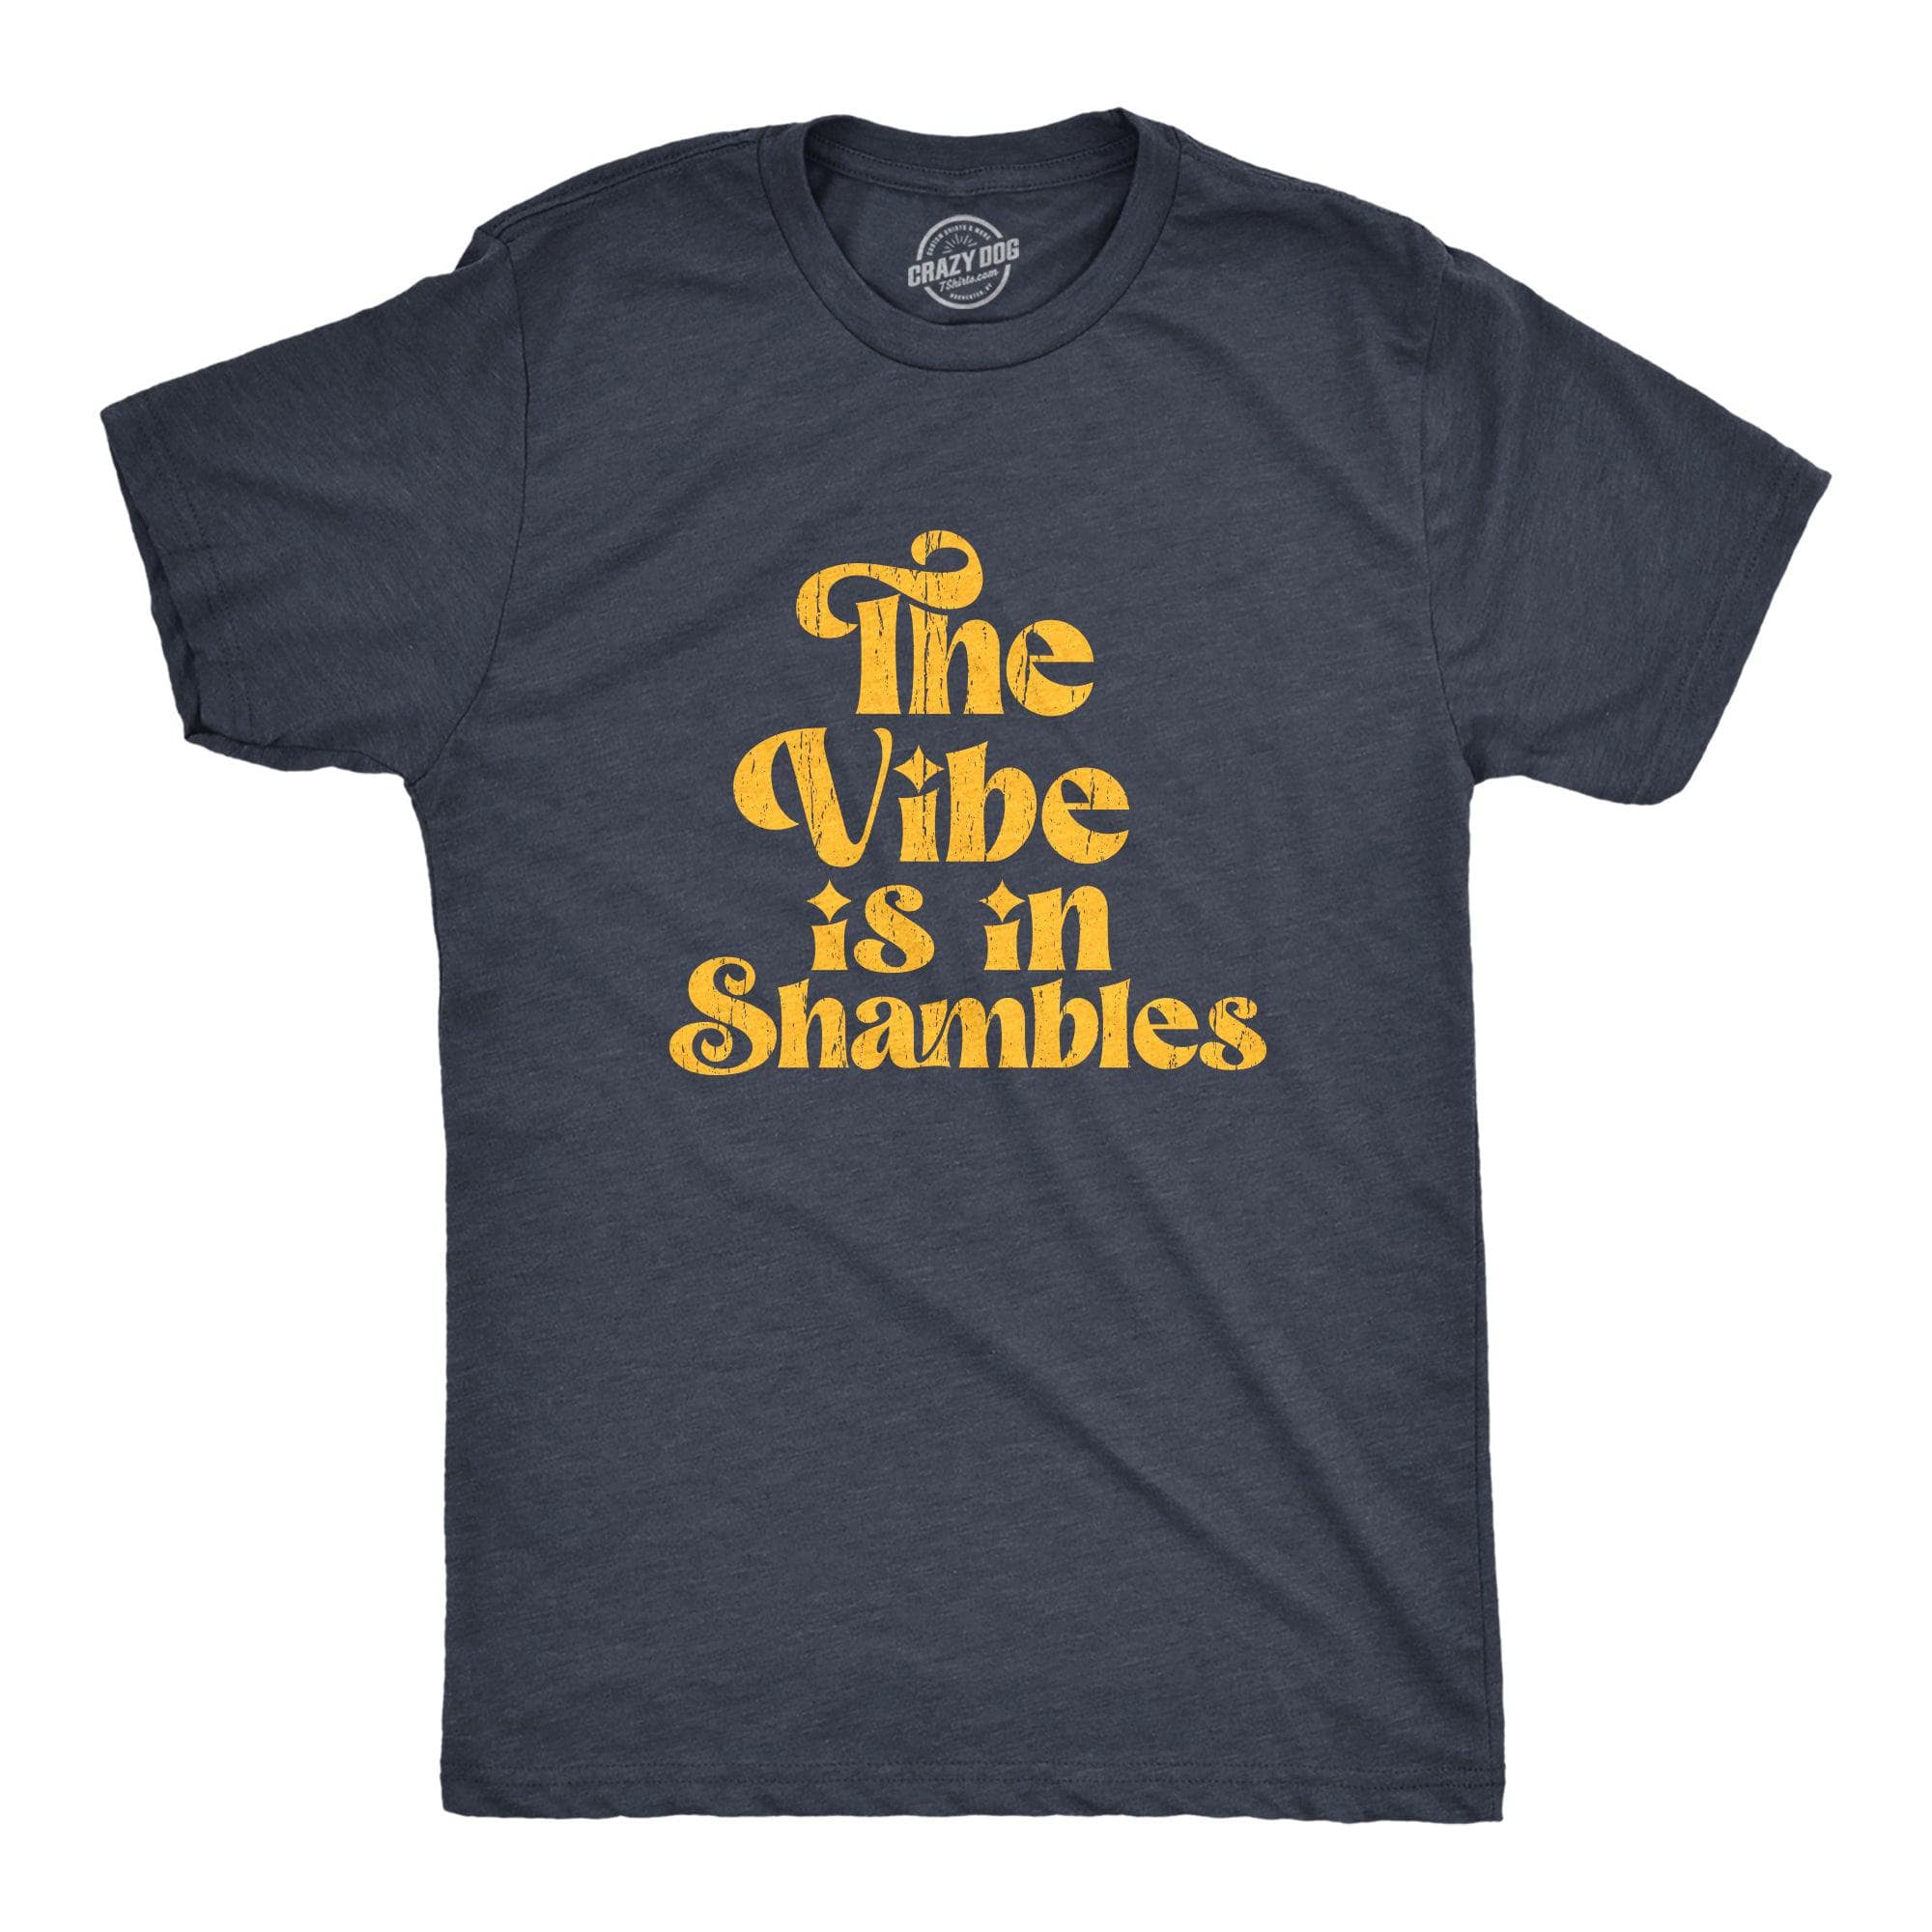 The Vibe Is In Shambles Men's Tshirt  -  Crazy Dog T-Shirts